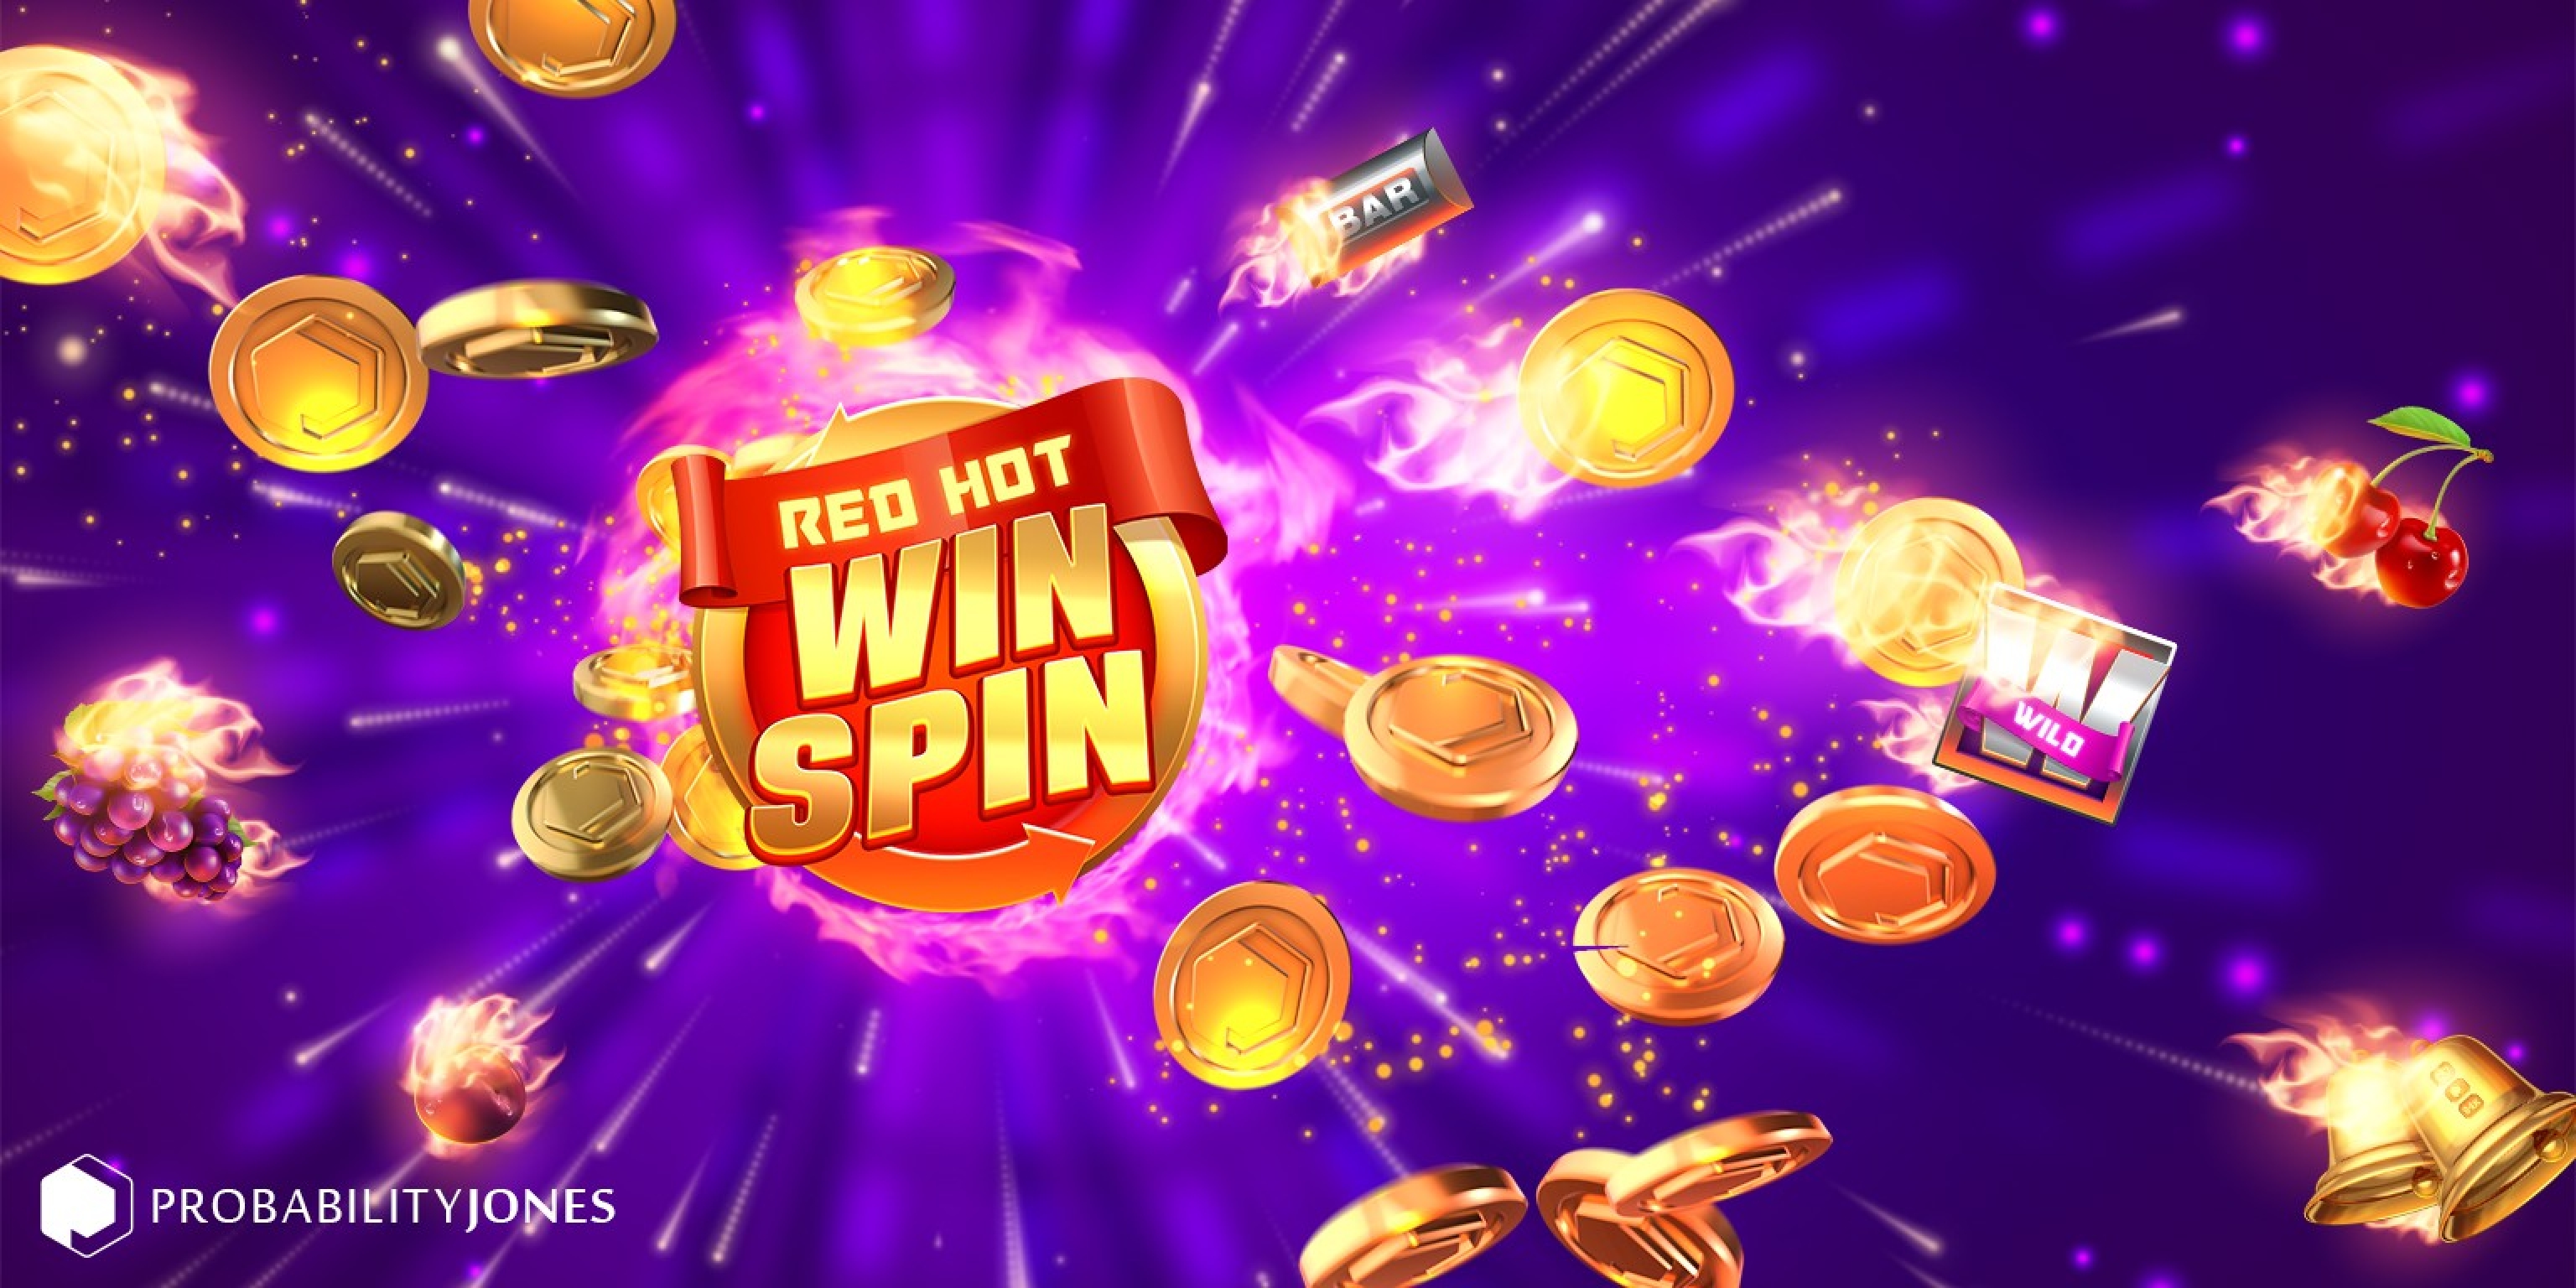 Red Hot Win Spin